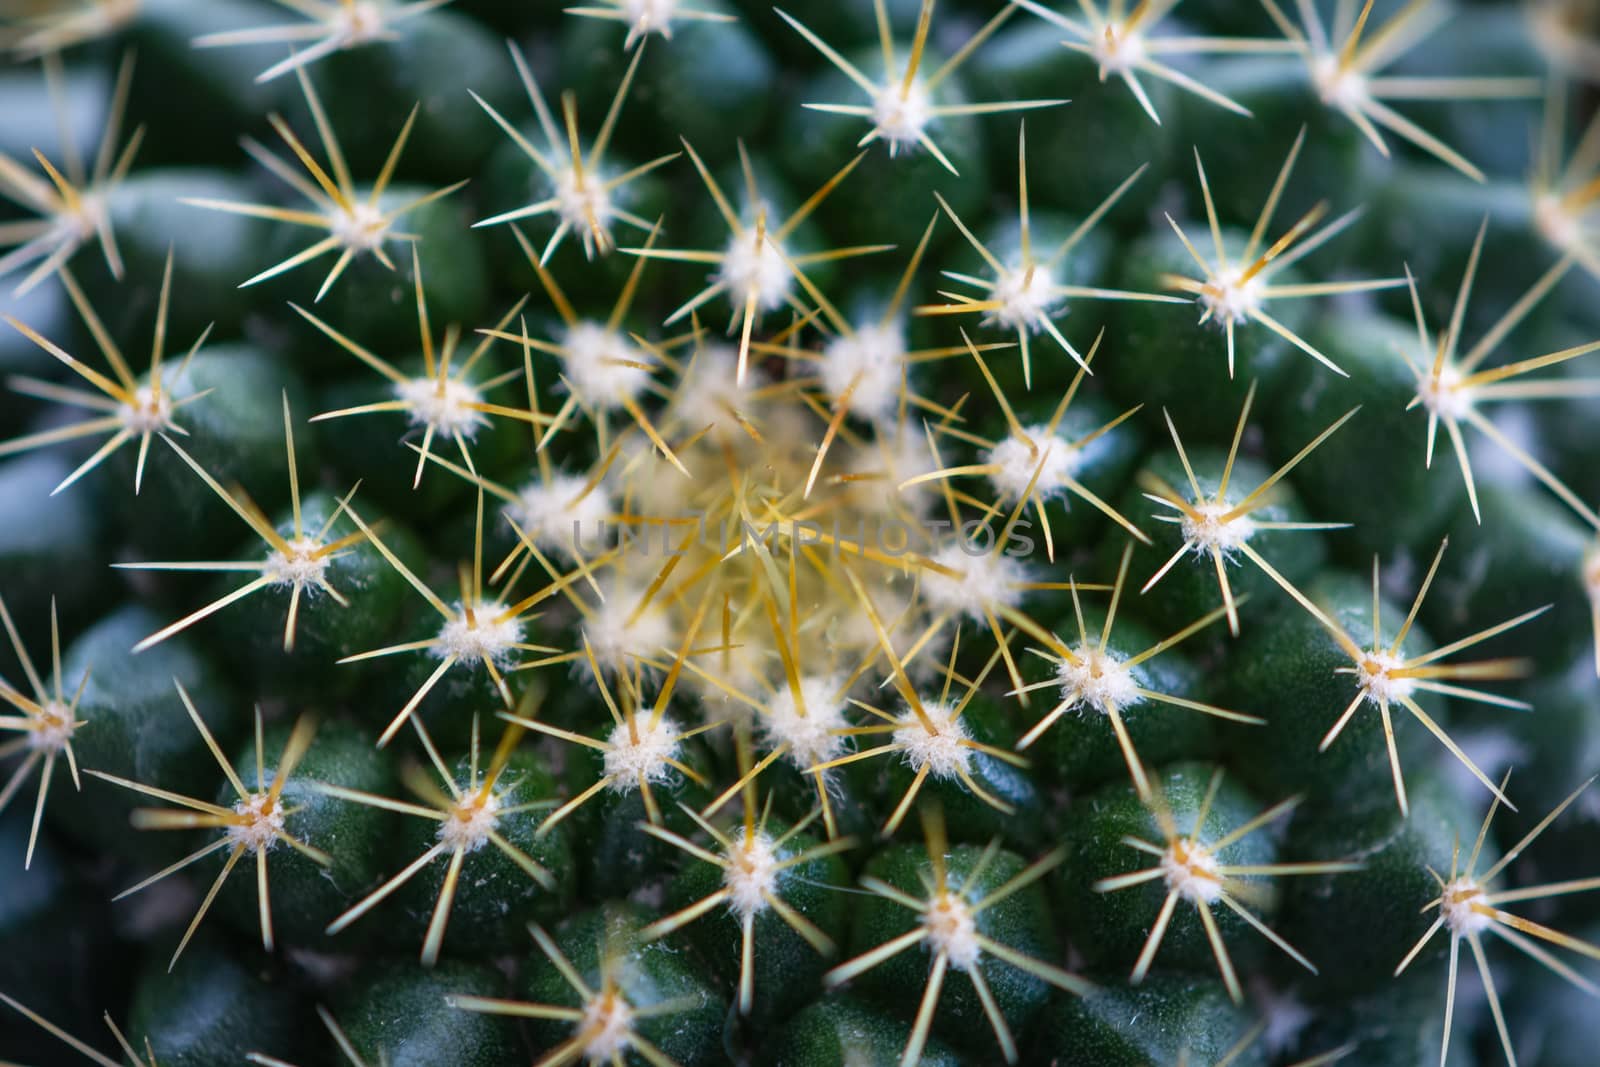 Close-up view of the glochids of a bright green cactus by brambillasimone